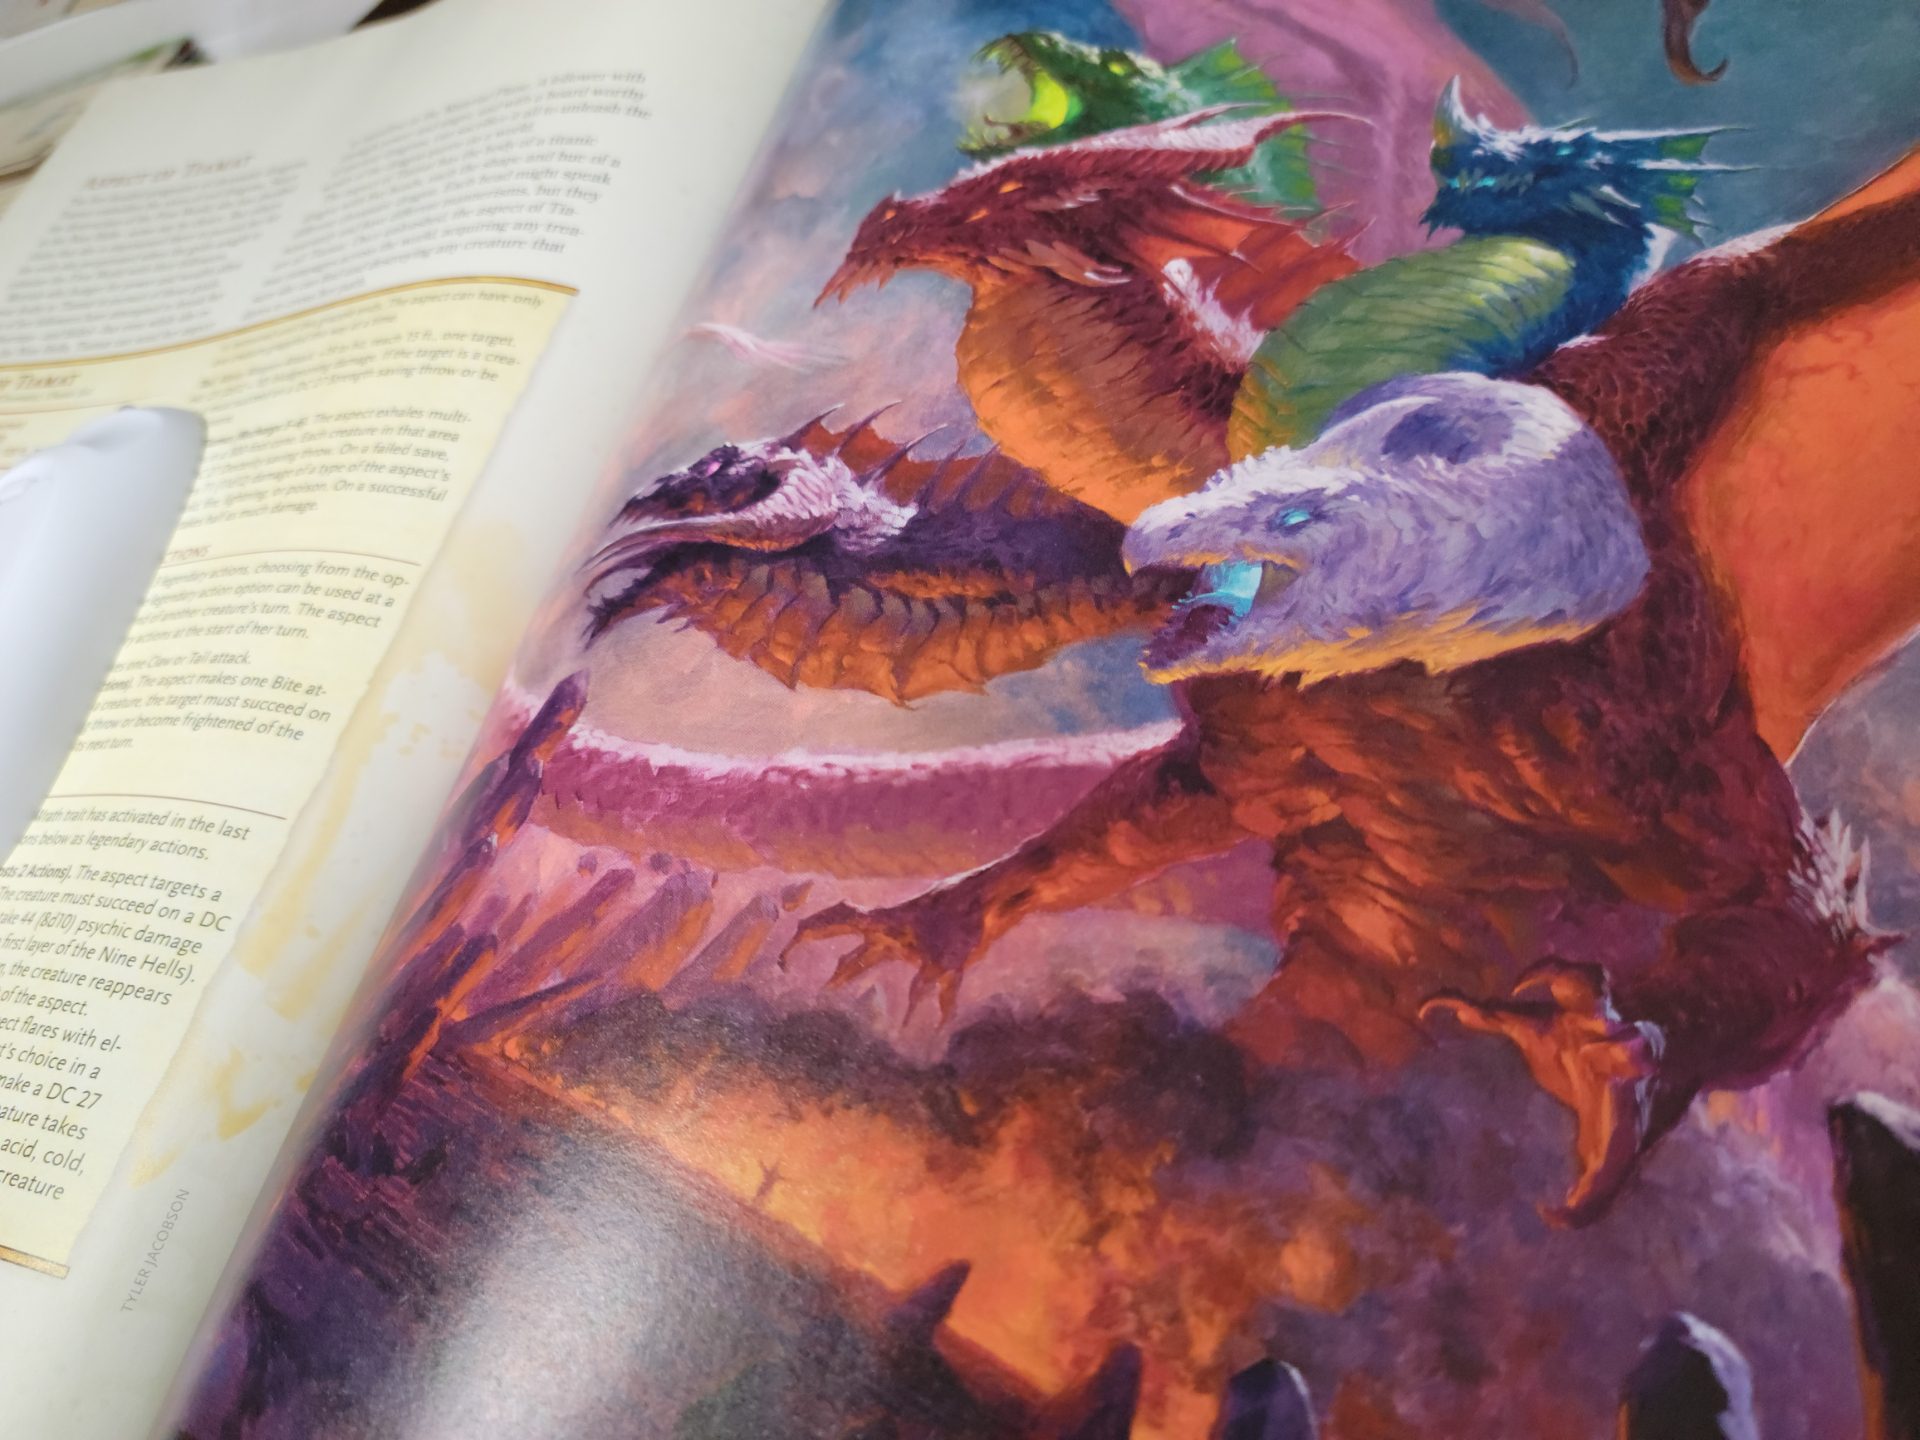 Fizban's Treasury of Dragons interior showing the Aspect of Tiamat